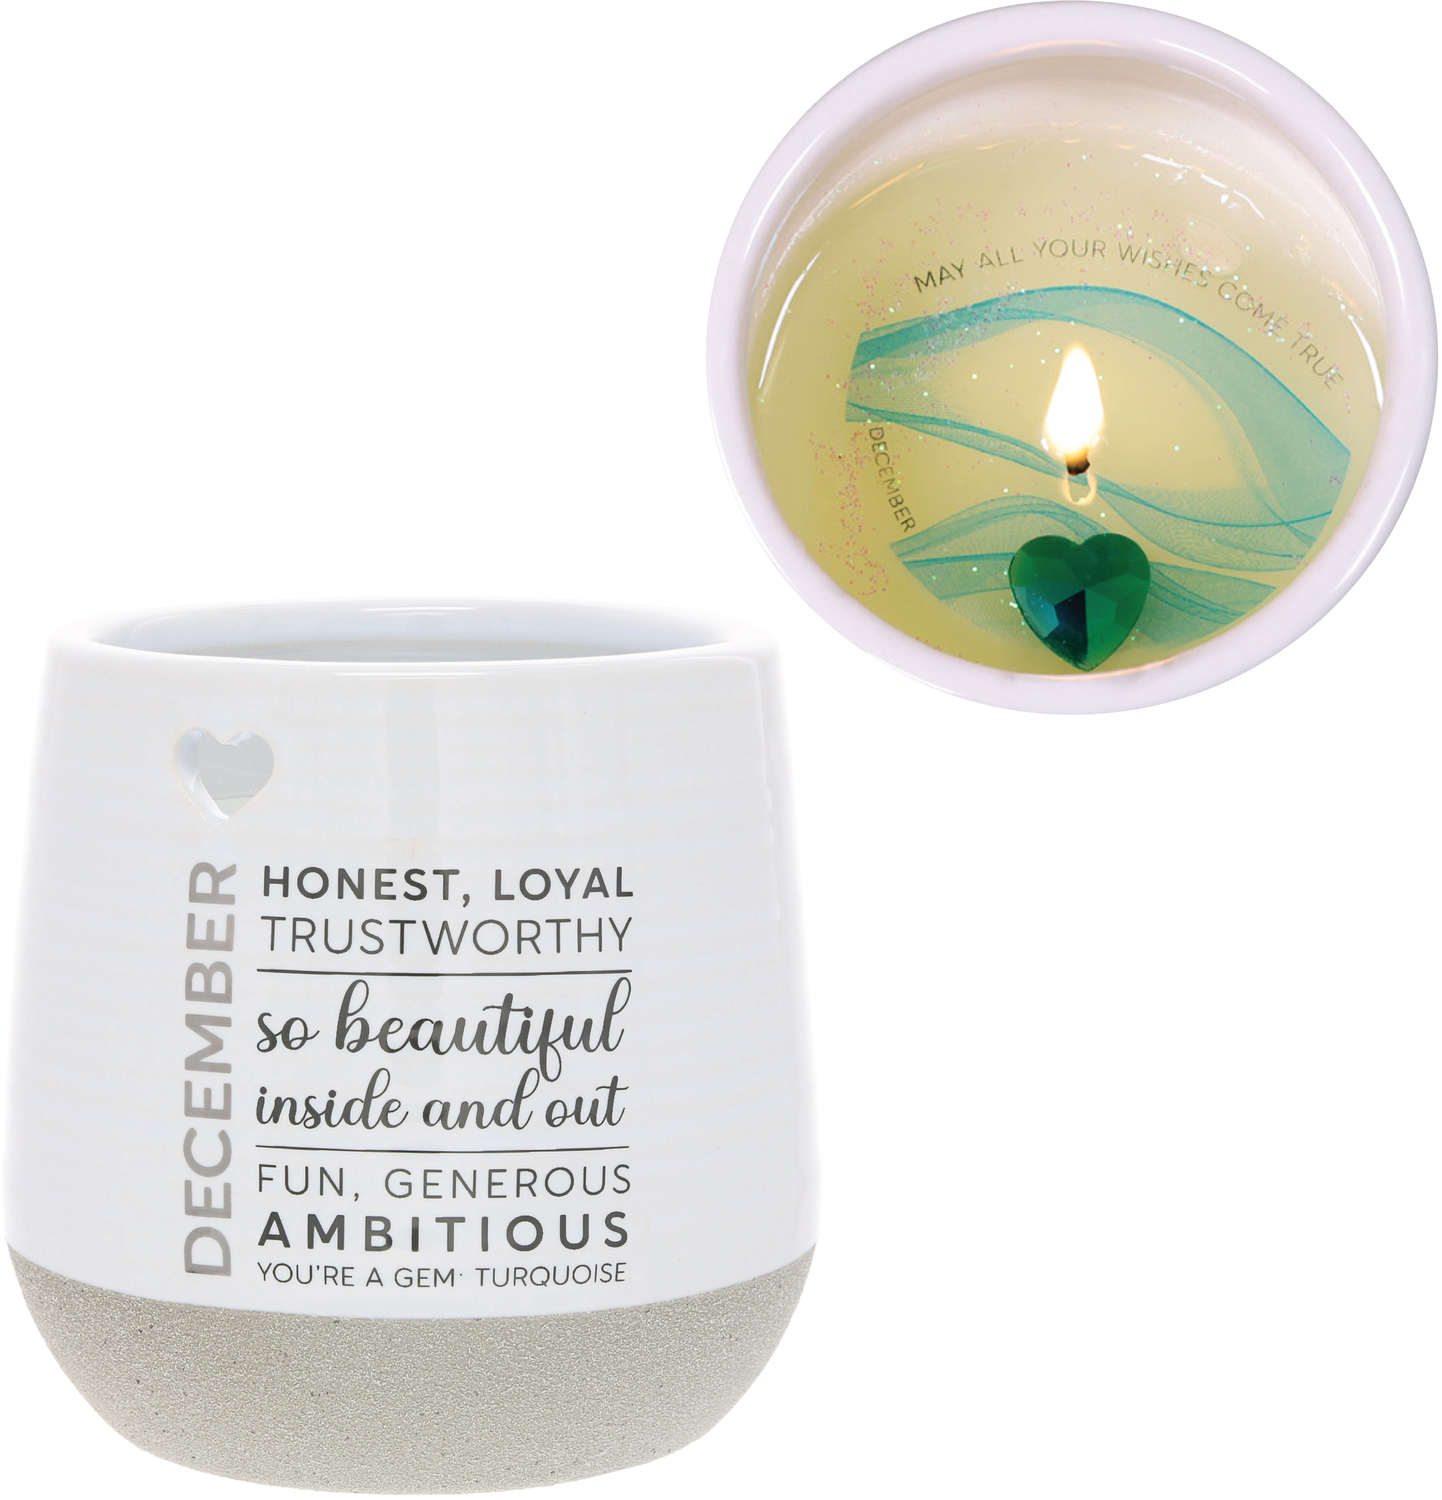 December by You Are a Gem - December - 11 oz - 100% Soy Wax Reveal Candle with Birthstone Scent: Tranquility